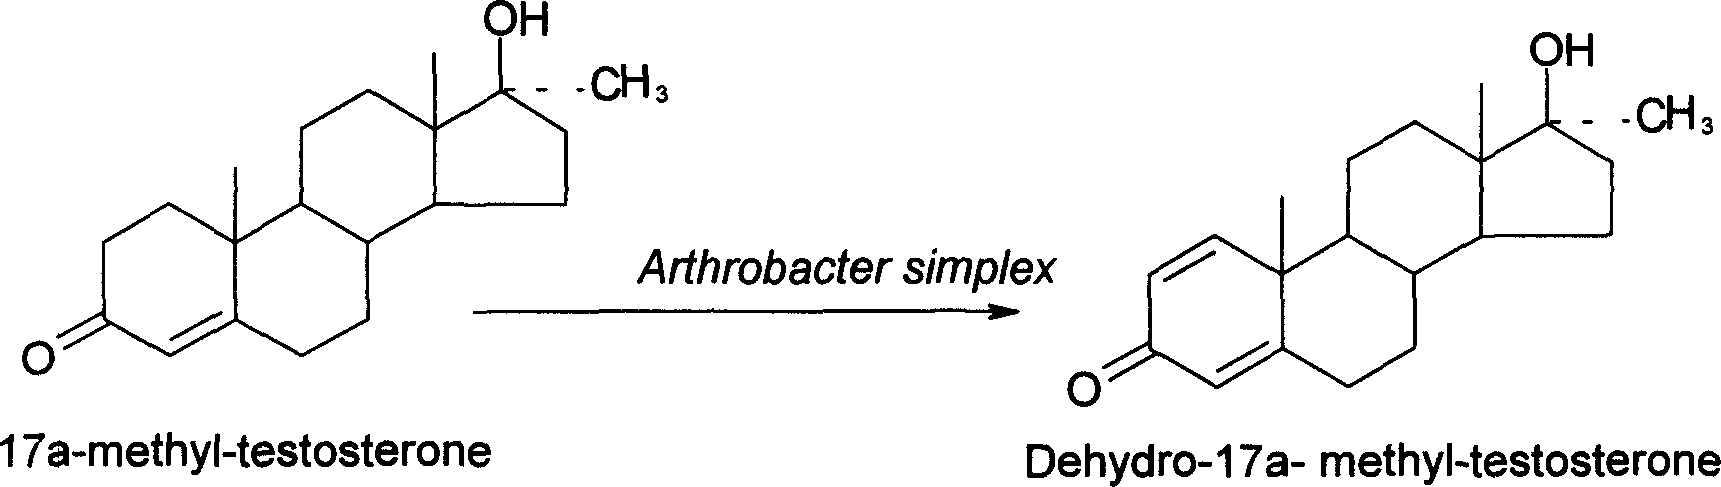 Preparation technique for producing mayandrosteron through microbial conversion method